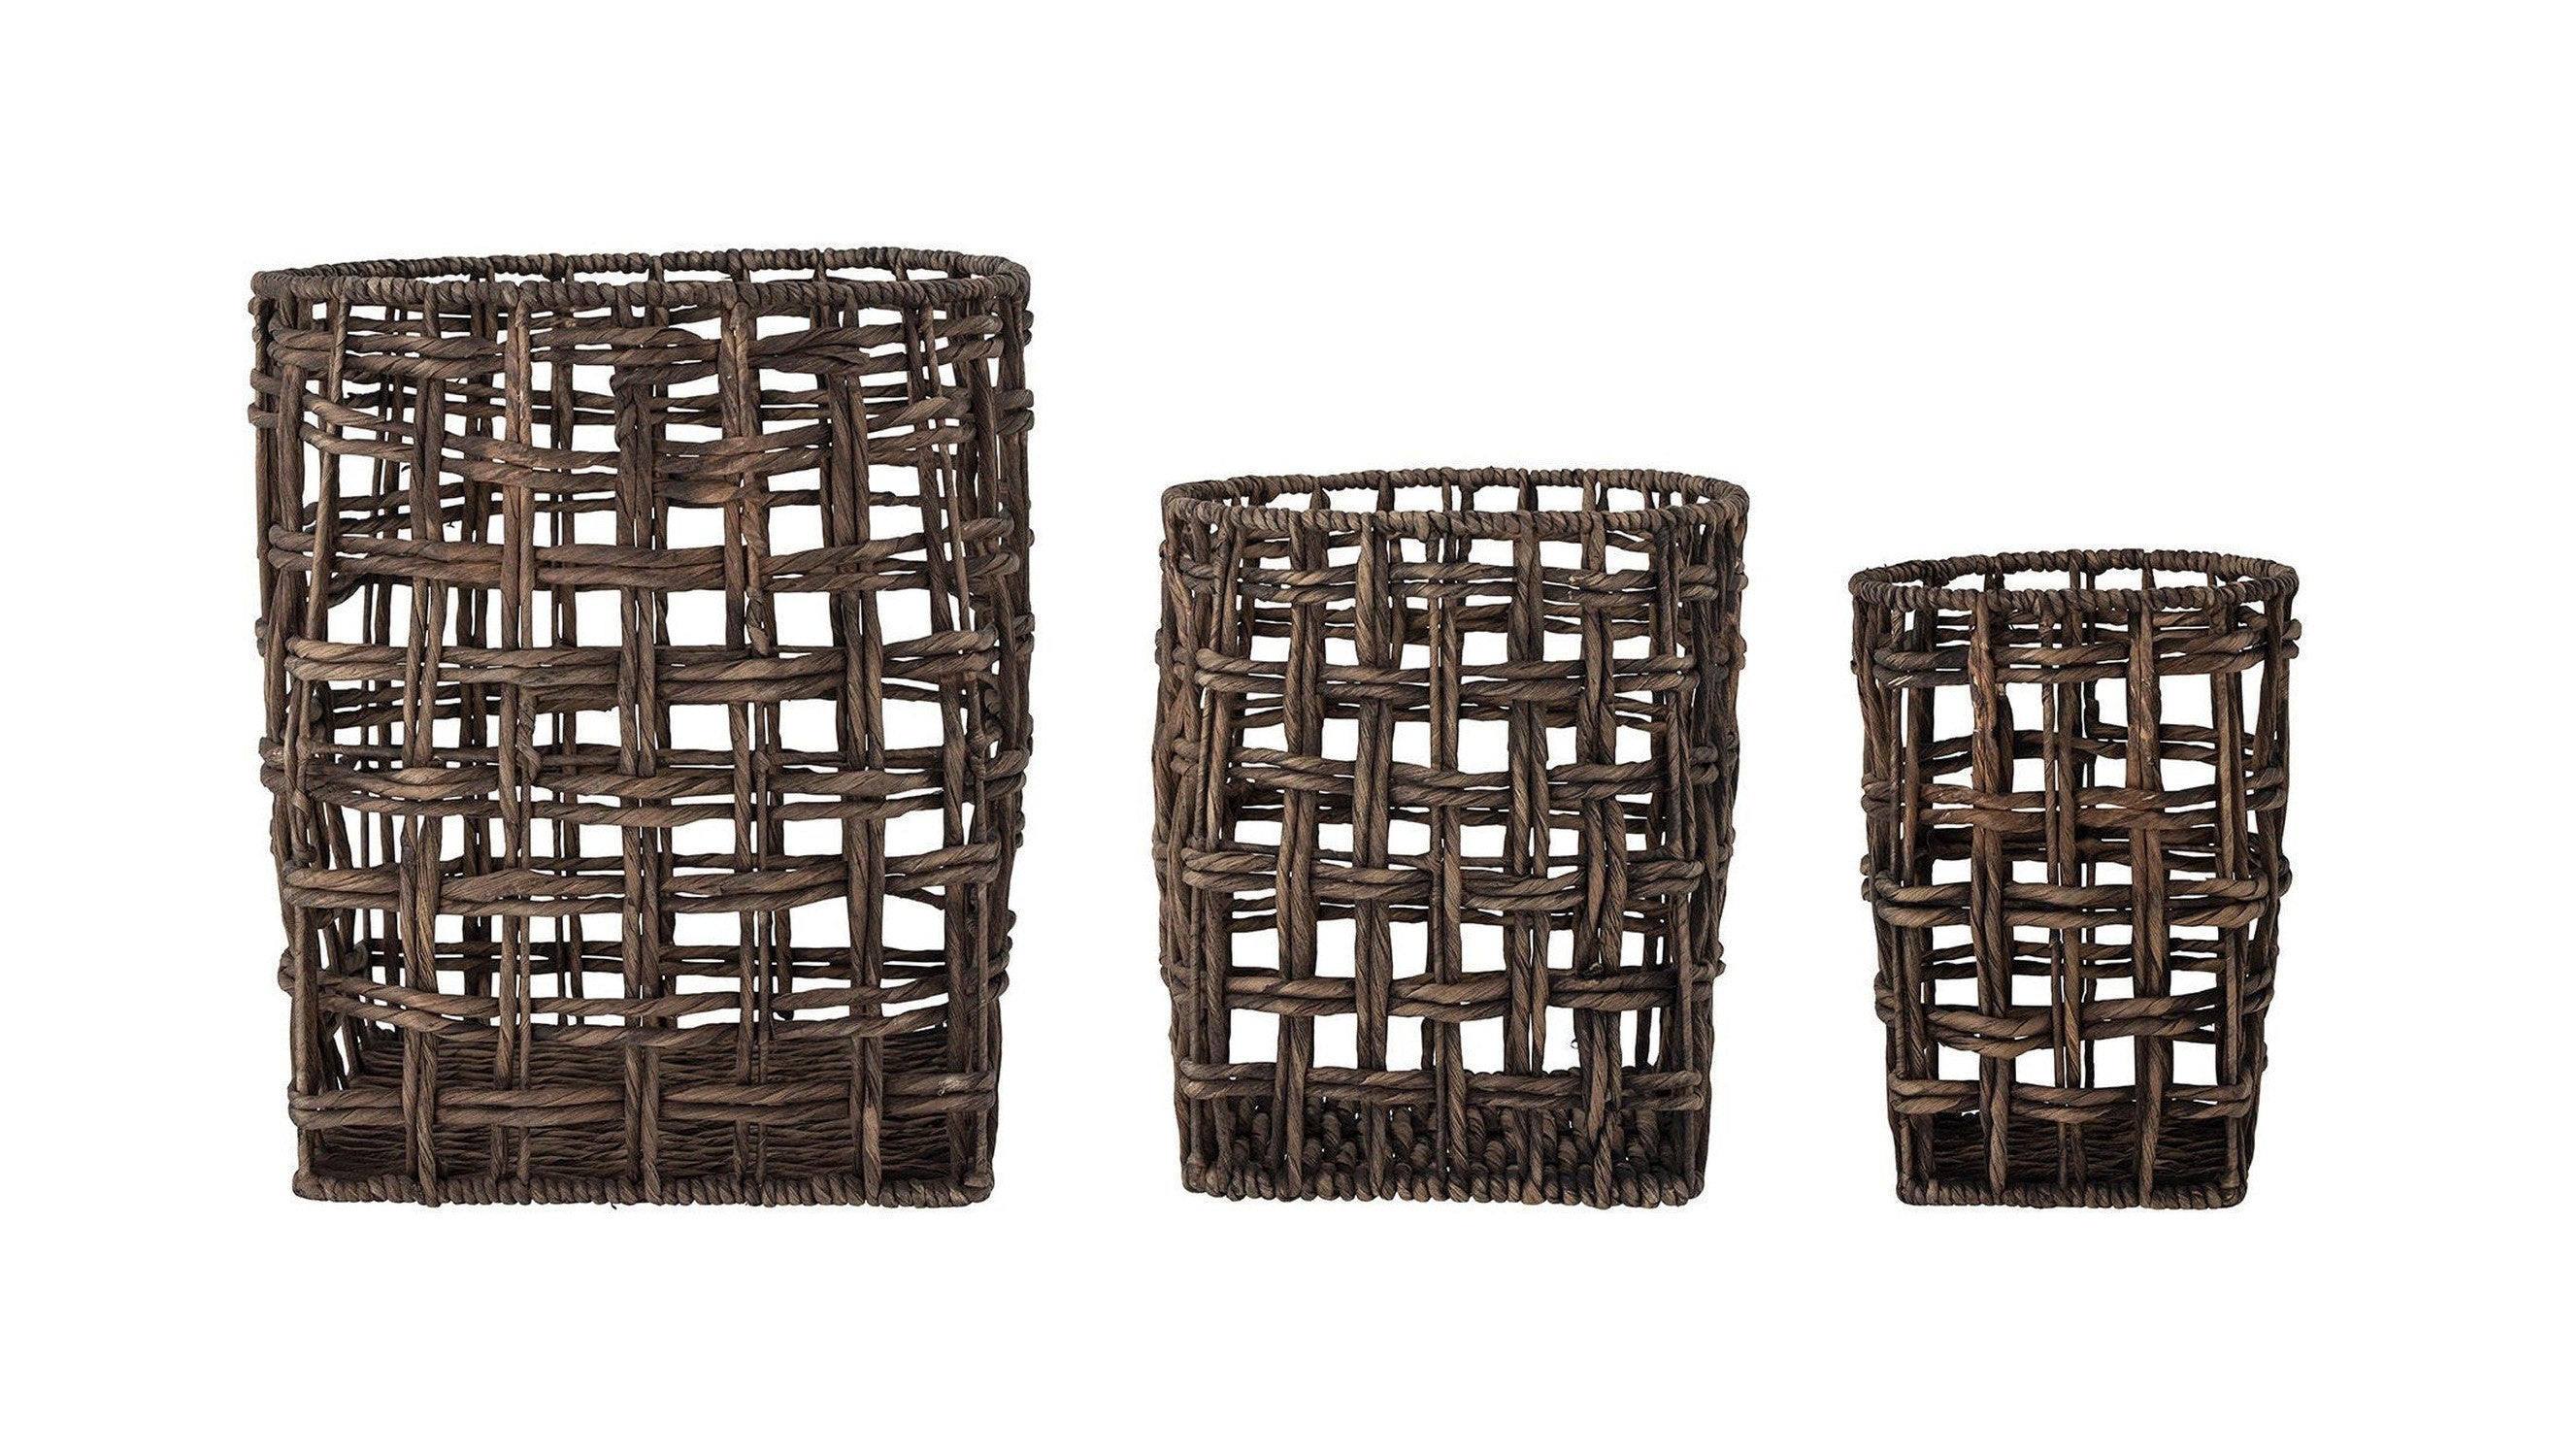 Creative Collection Fune Basket, Brown, Water Hyacinth